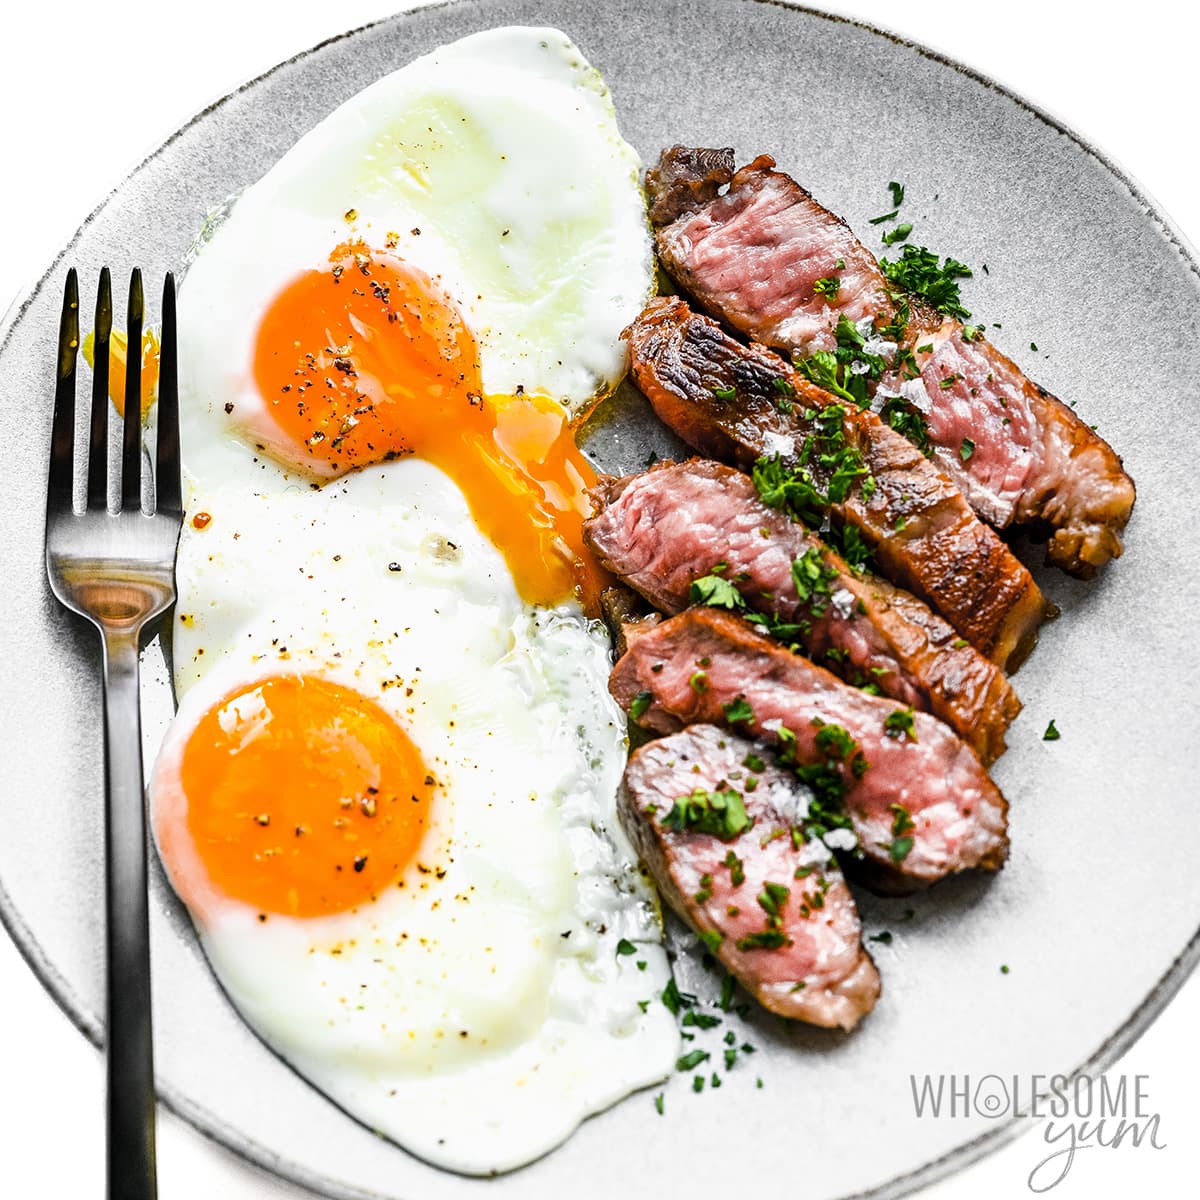 Sunny side up eggs and sliced steak on a plate.